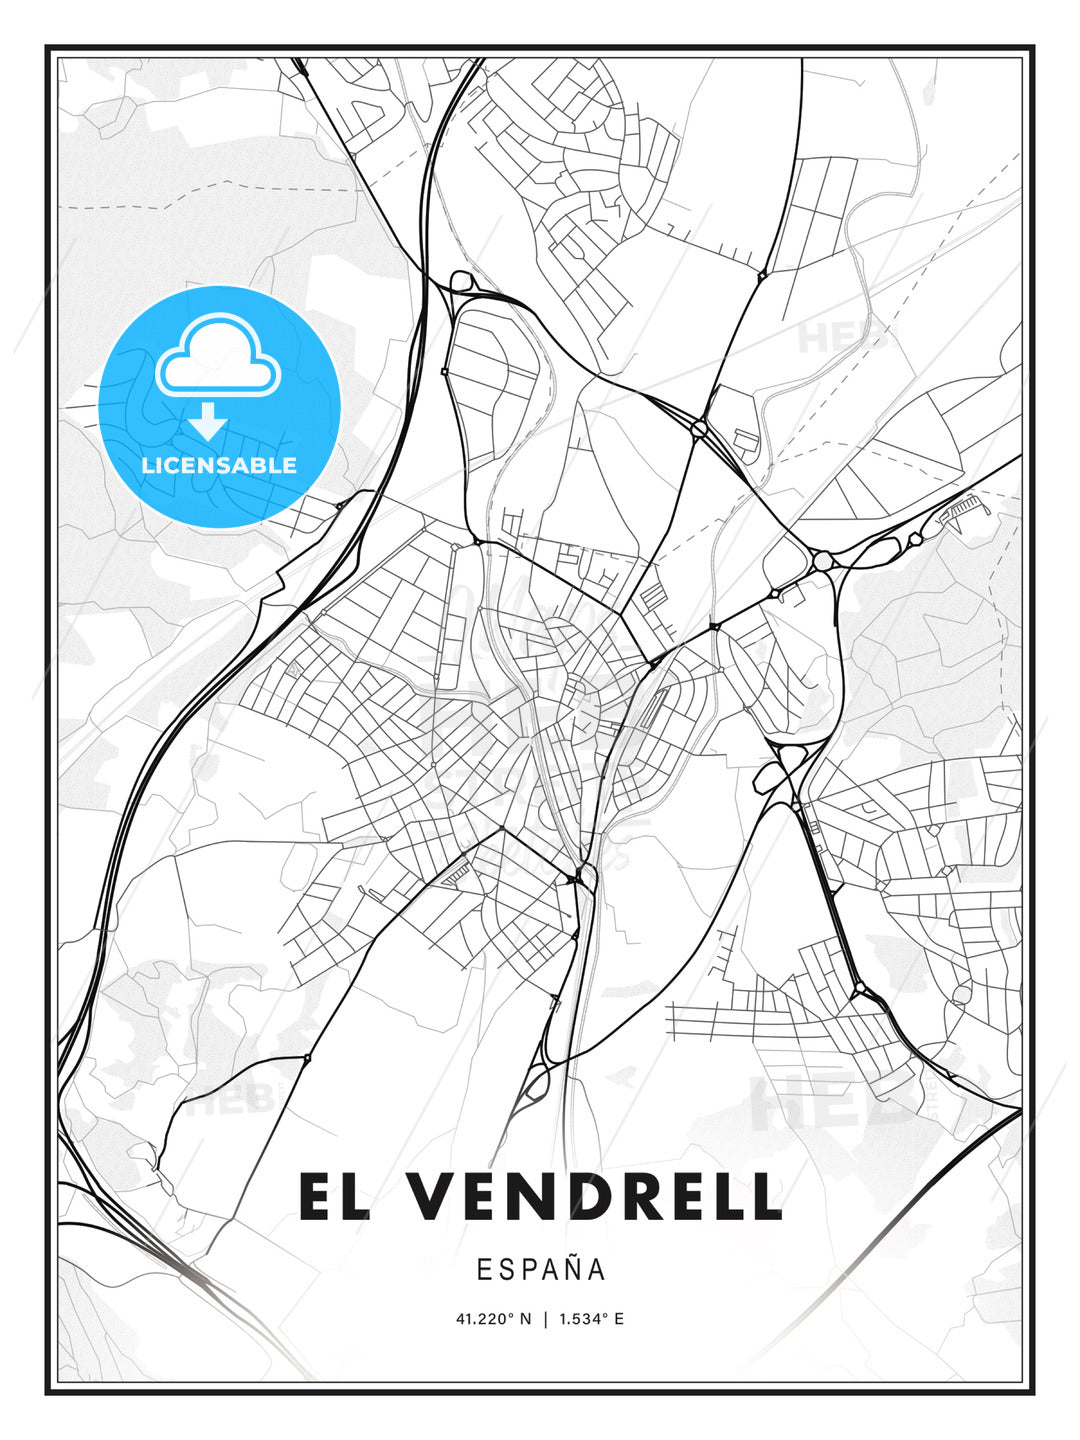 El Vendrell, Spain, Modern Print Template in Various Formats - HEBSTREITS Sketches